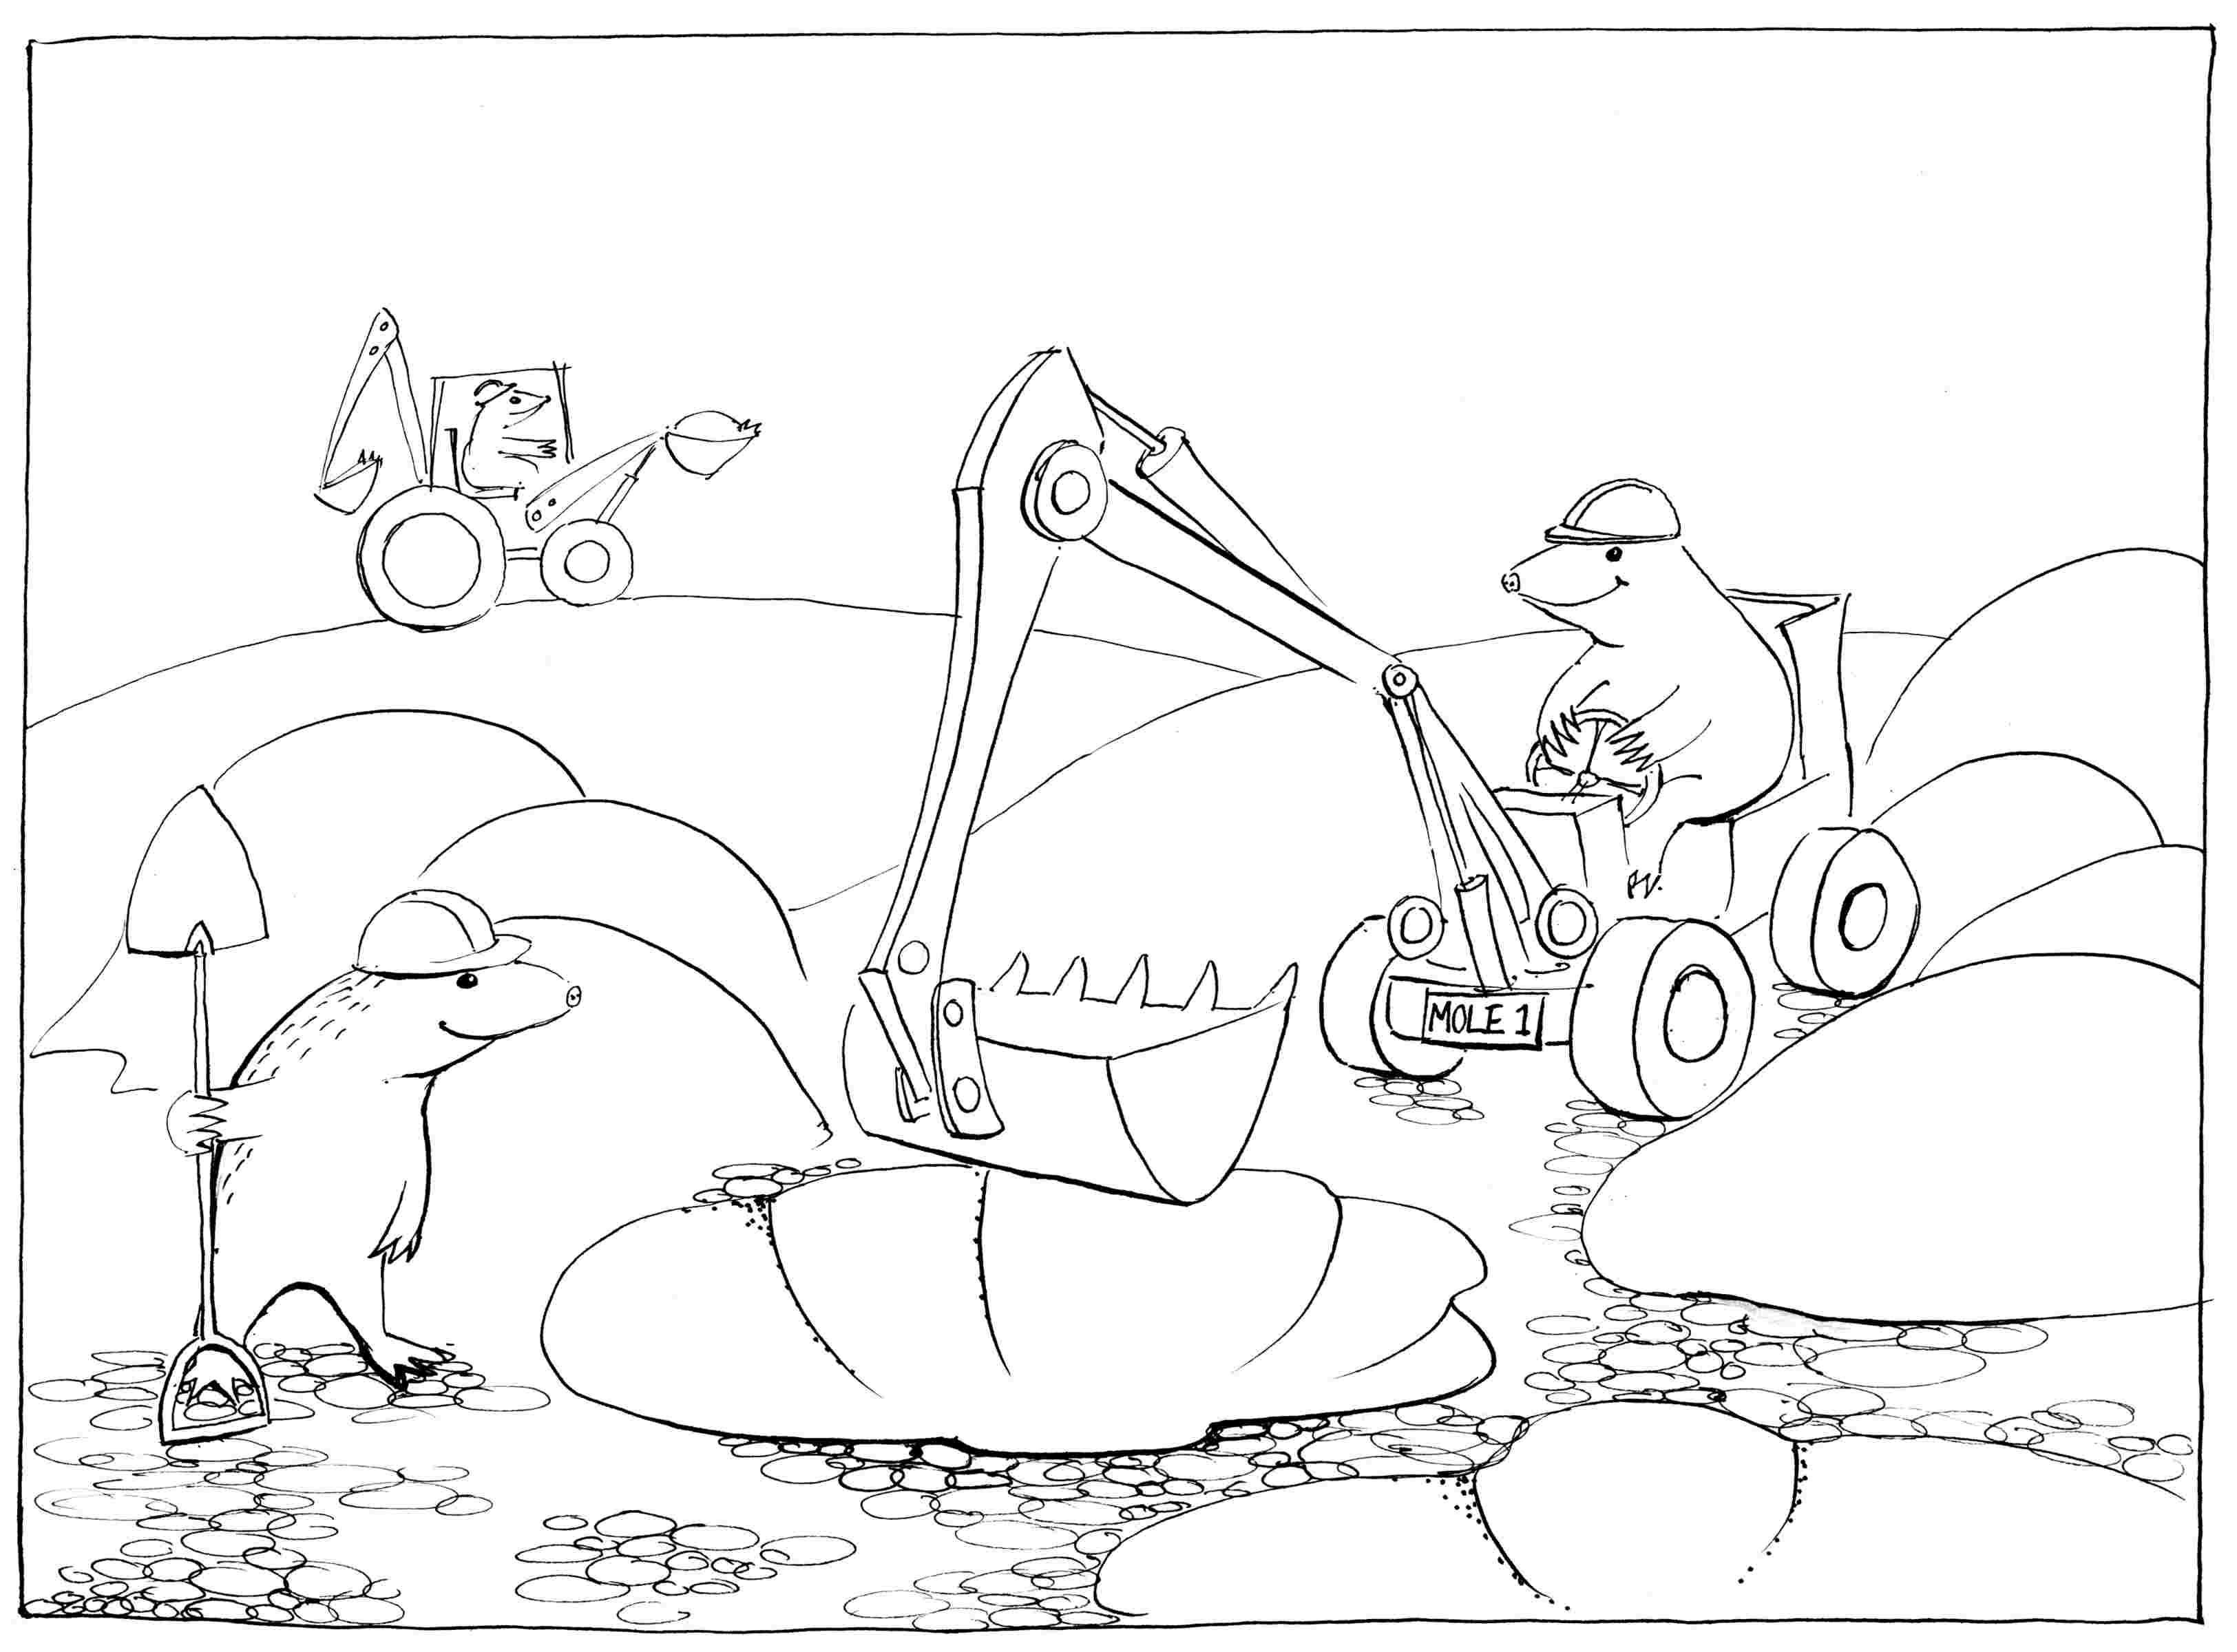 Mole Hills - colouring-in drawing - to download, right click and save, print out and colour in!